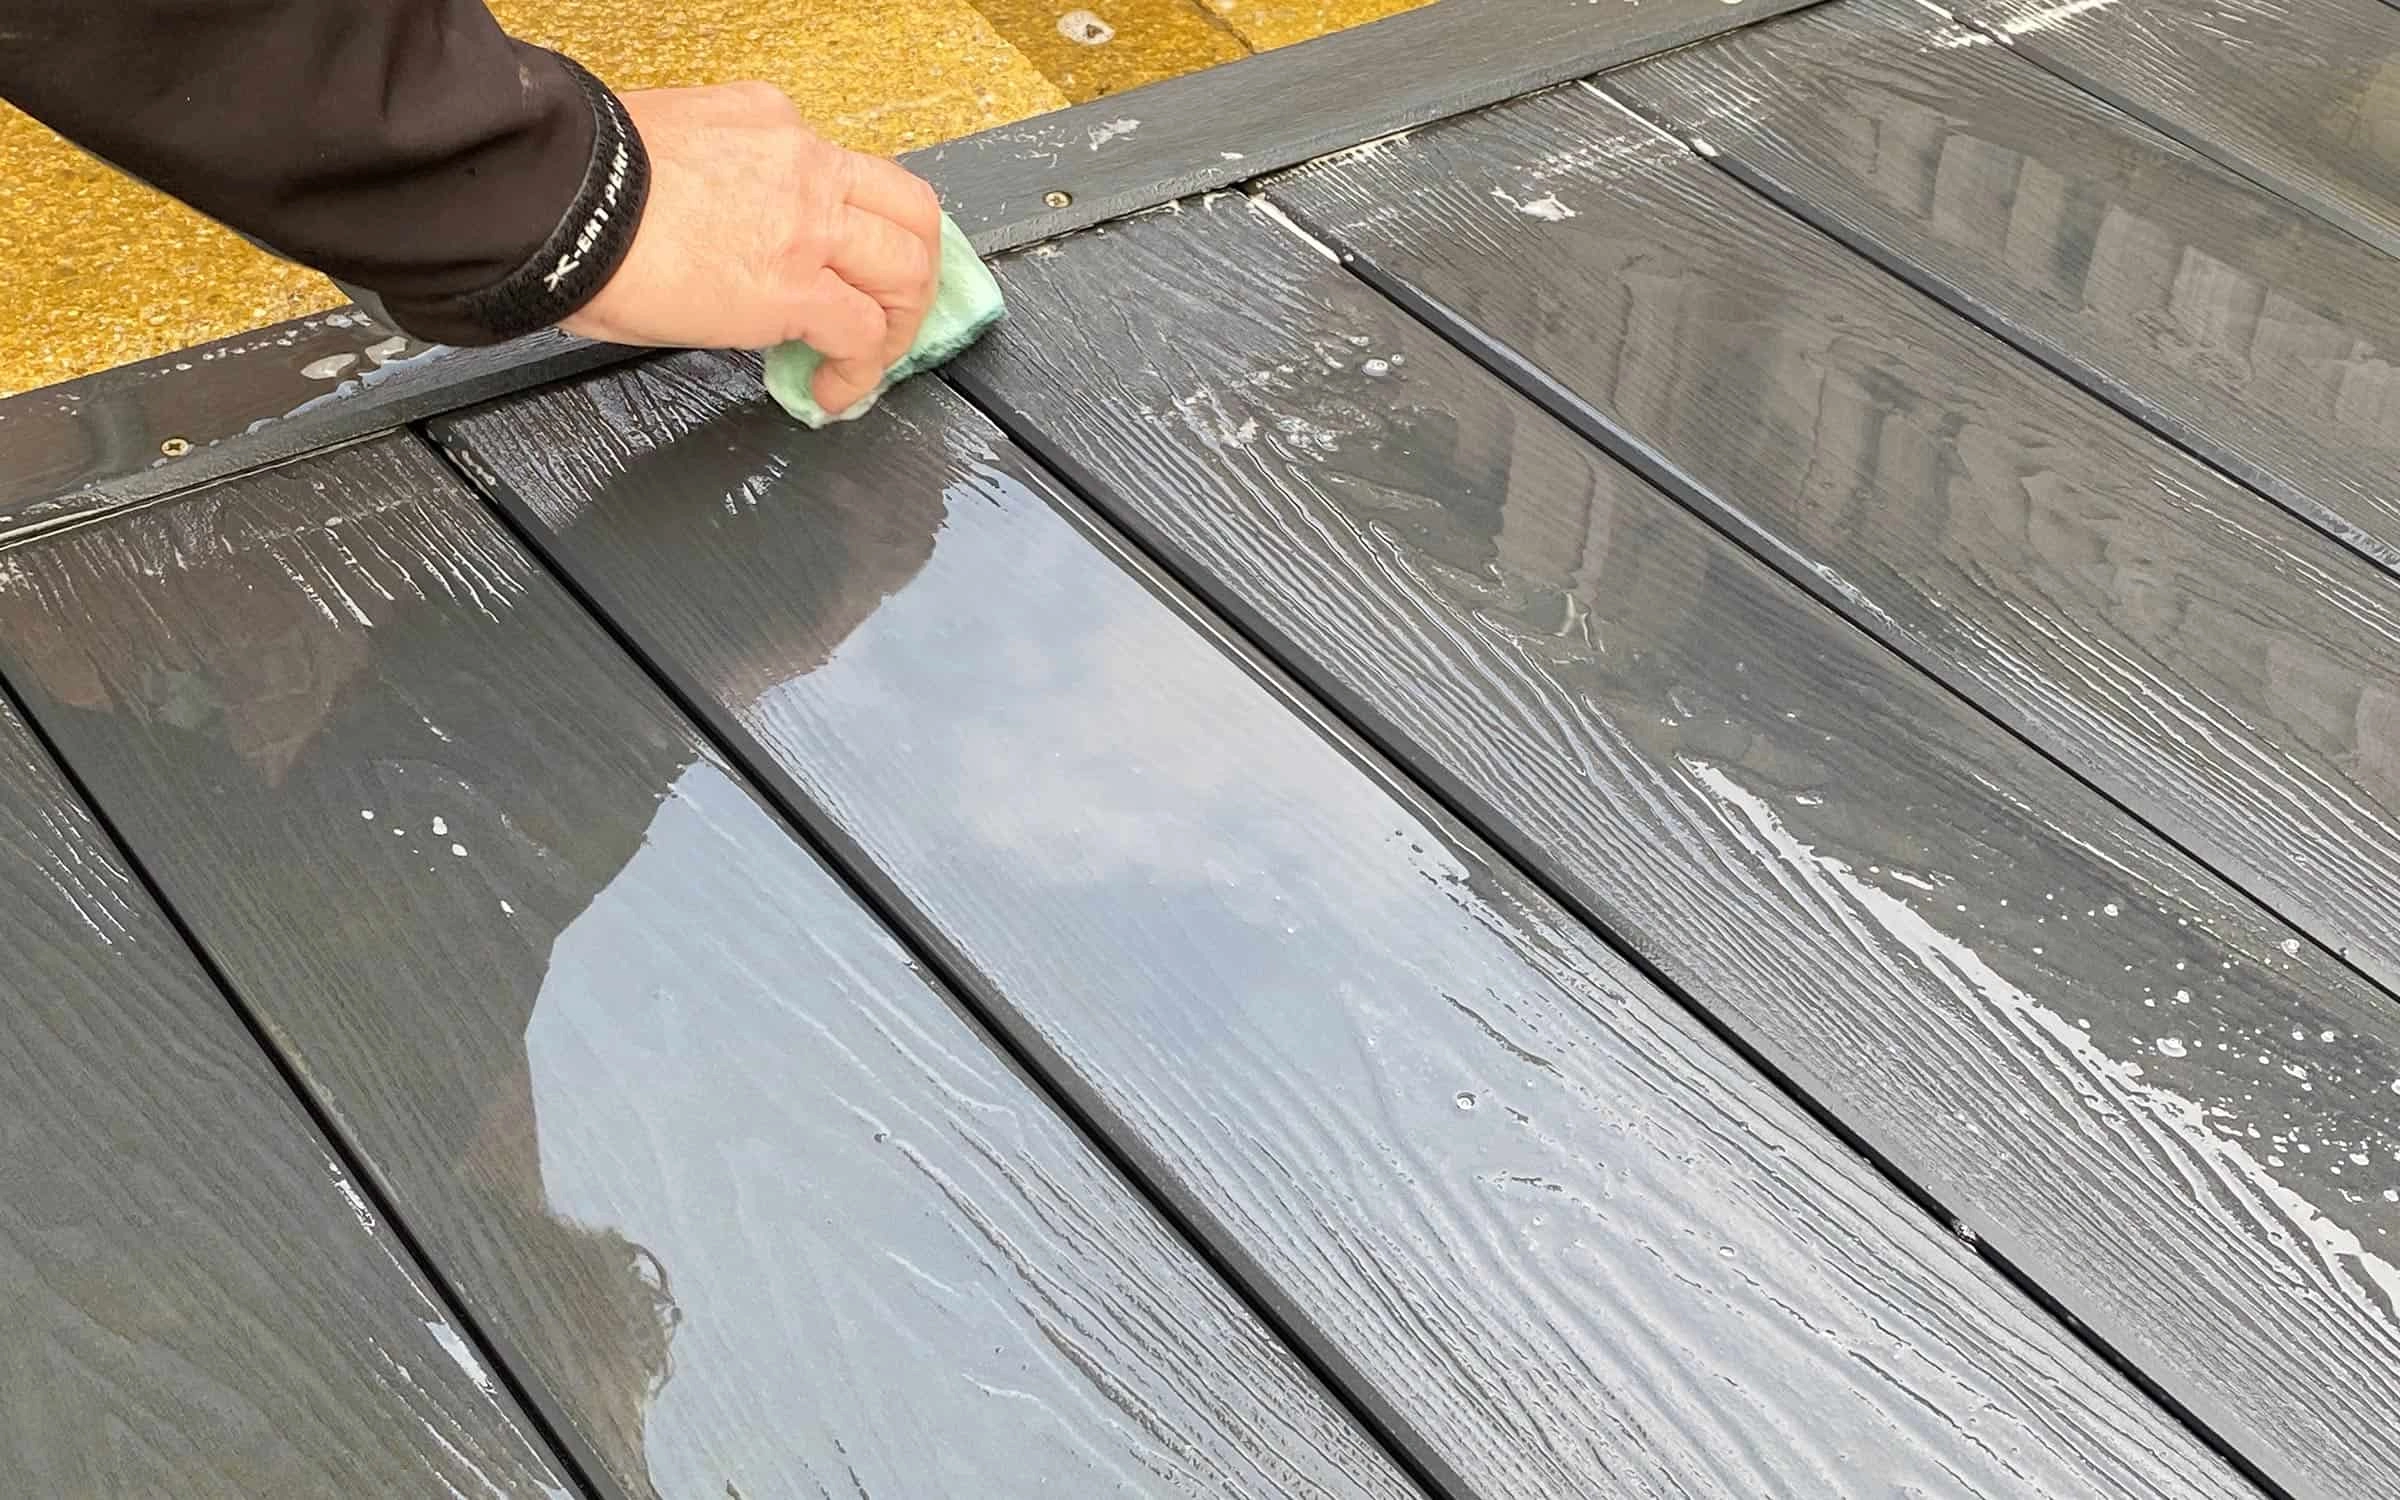 An image of a person using a cloth and water to initially clean their composite decking so it's sparkling queen.